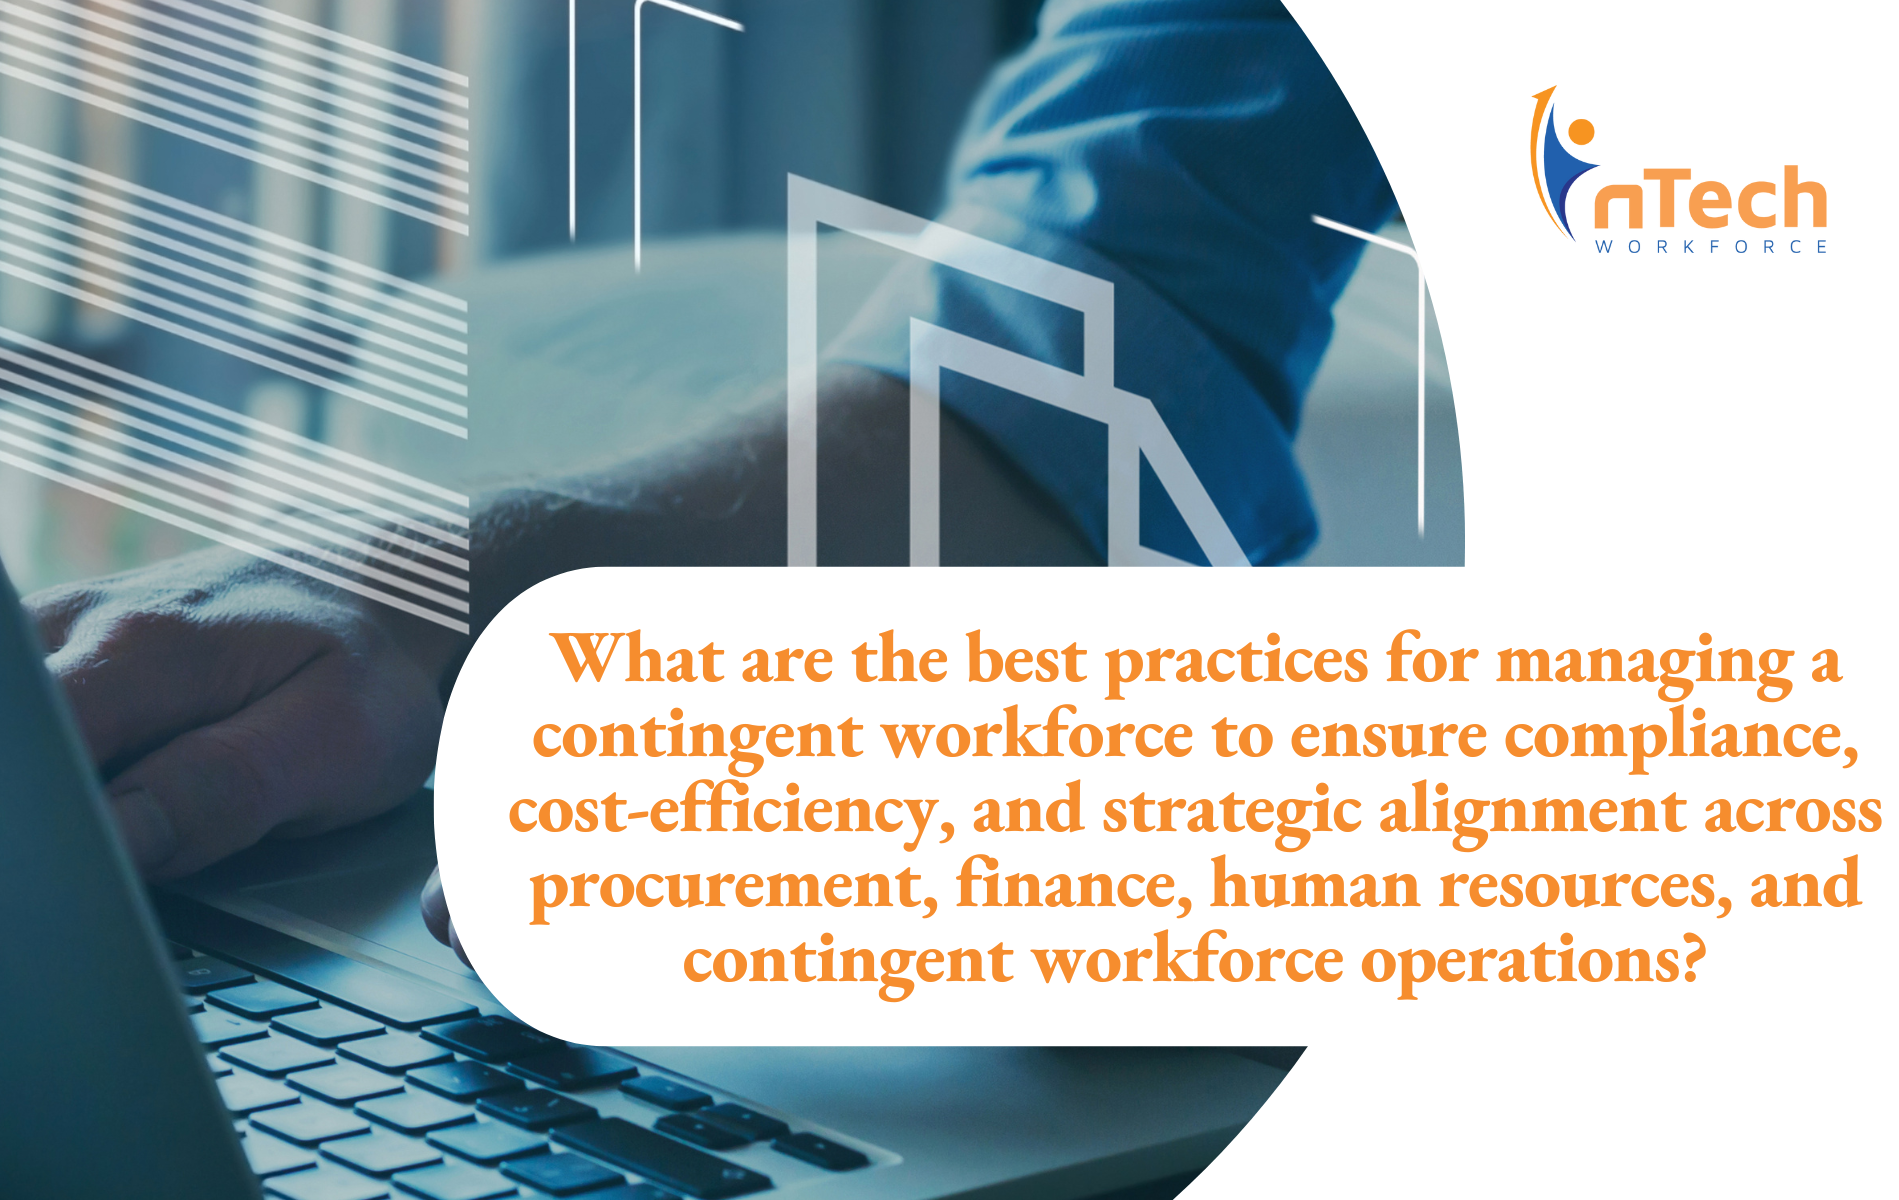 What are the best practices for managing a contingent workforce to ensure compliance, cost-efficiency, and strategic alignment across procurement, finance, human resources, and contingent workforce operations?